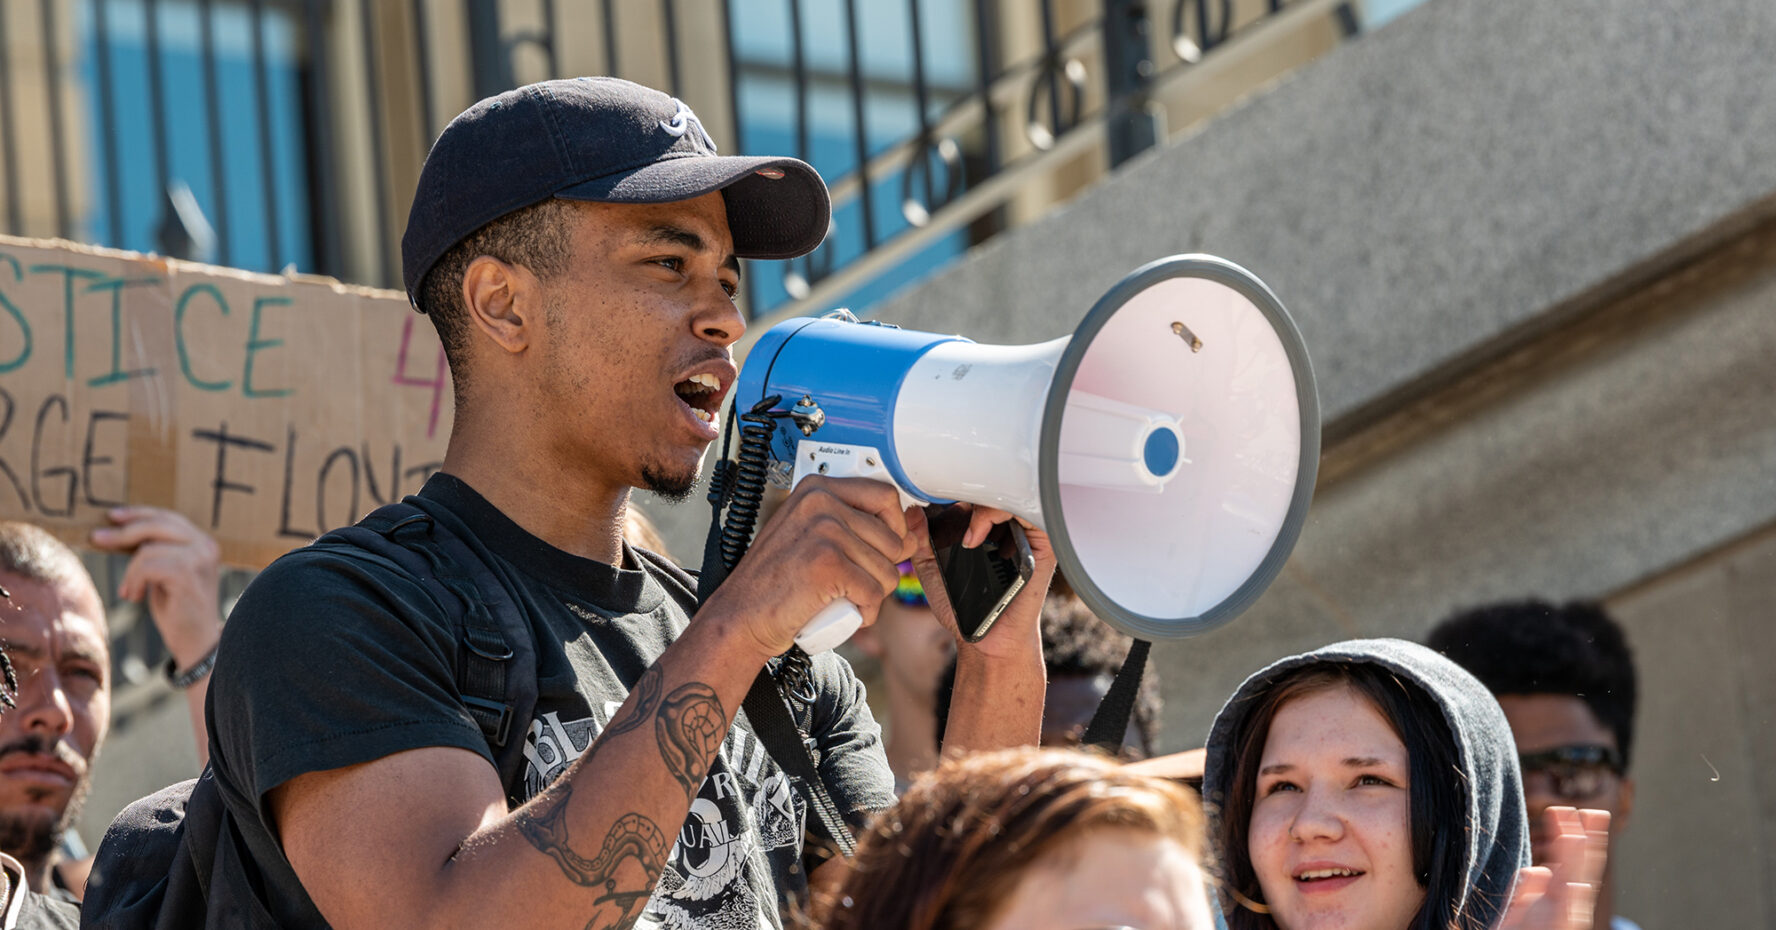 A young man speaks to a crowd through a bullhorn.